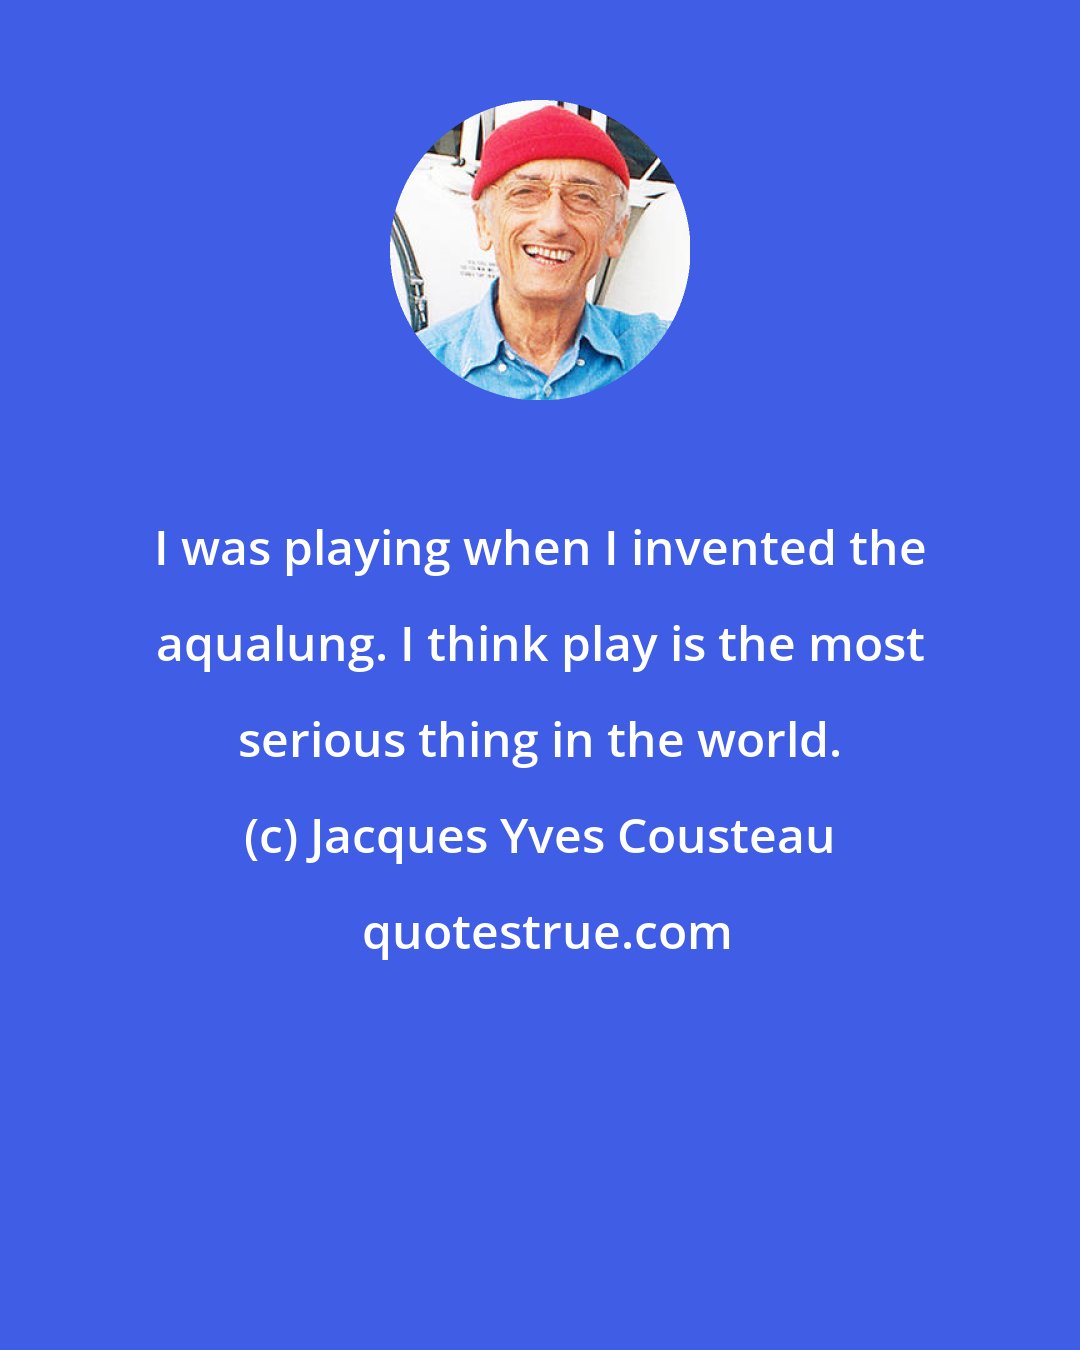 Jacques Yves Cousteau: I was playing when I invented the aqualung. I think play is the most serious thing in the world.